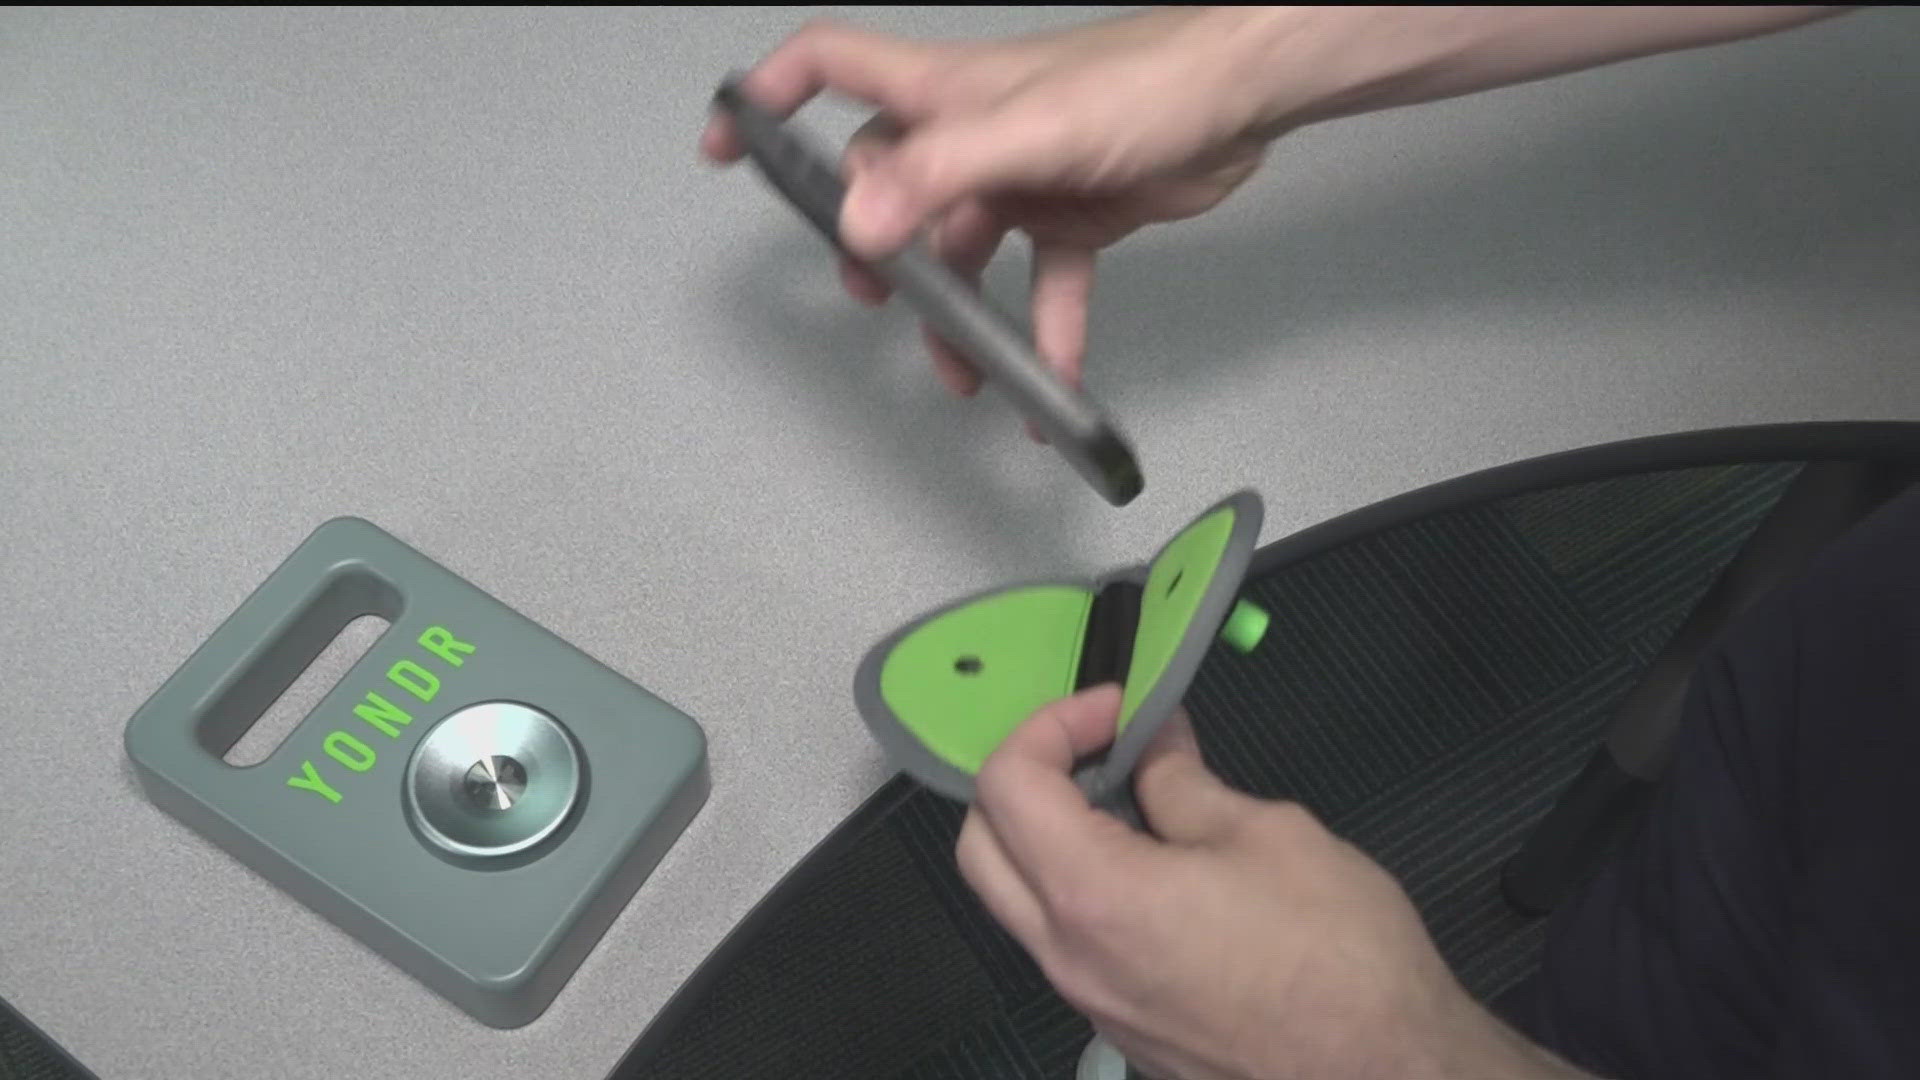 The pouches have been used in districts across the country in an effort to cut down on the distractions caused by cellphones in the classroom.